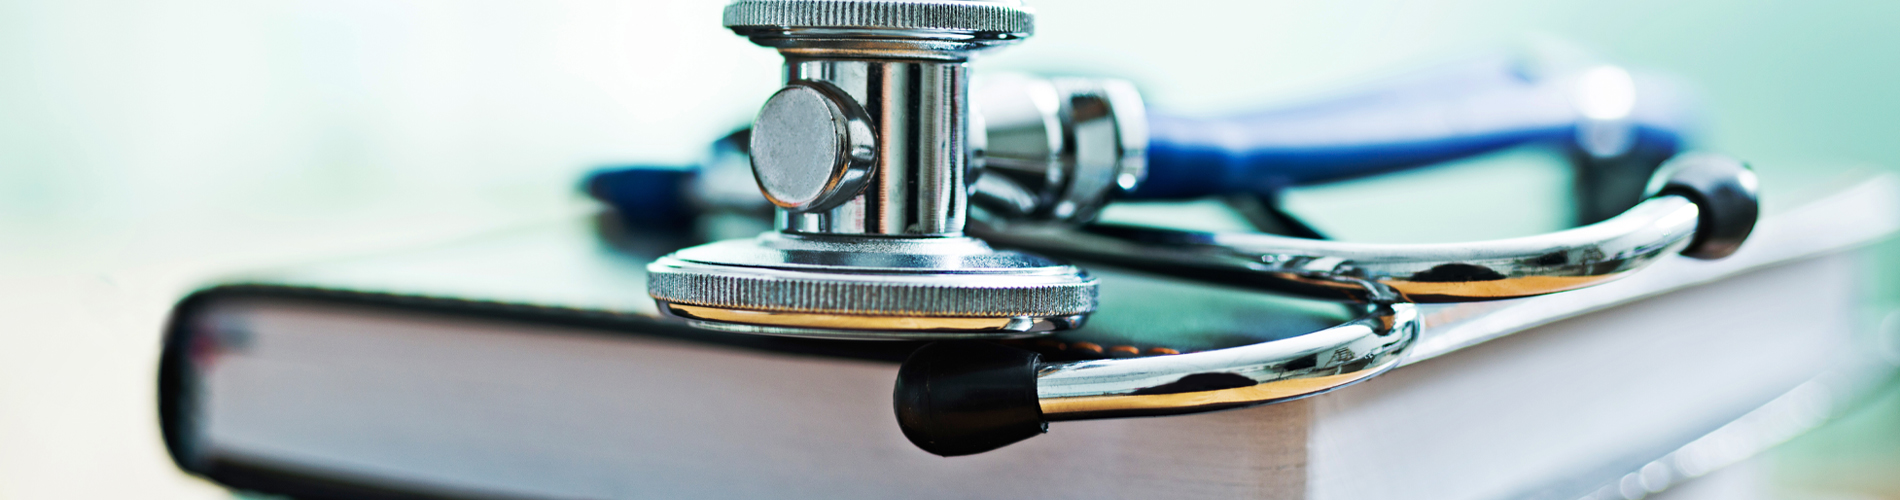 Health - medical stethescope on books 1900x500